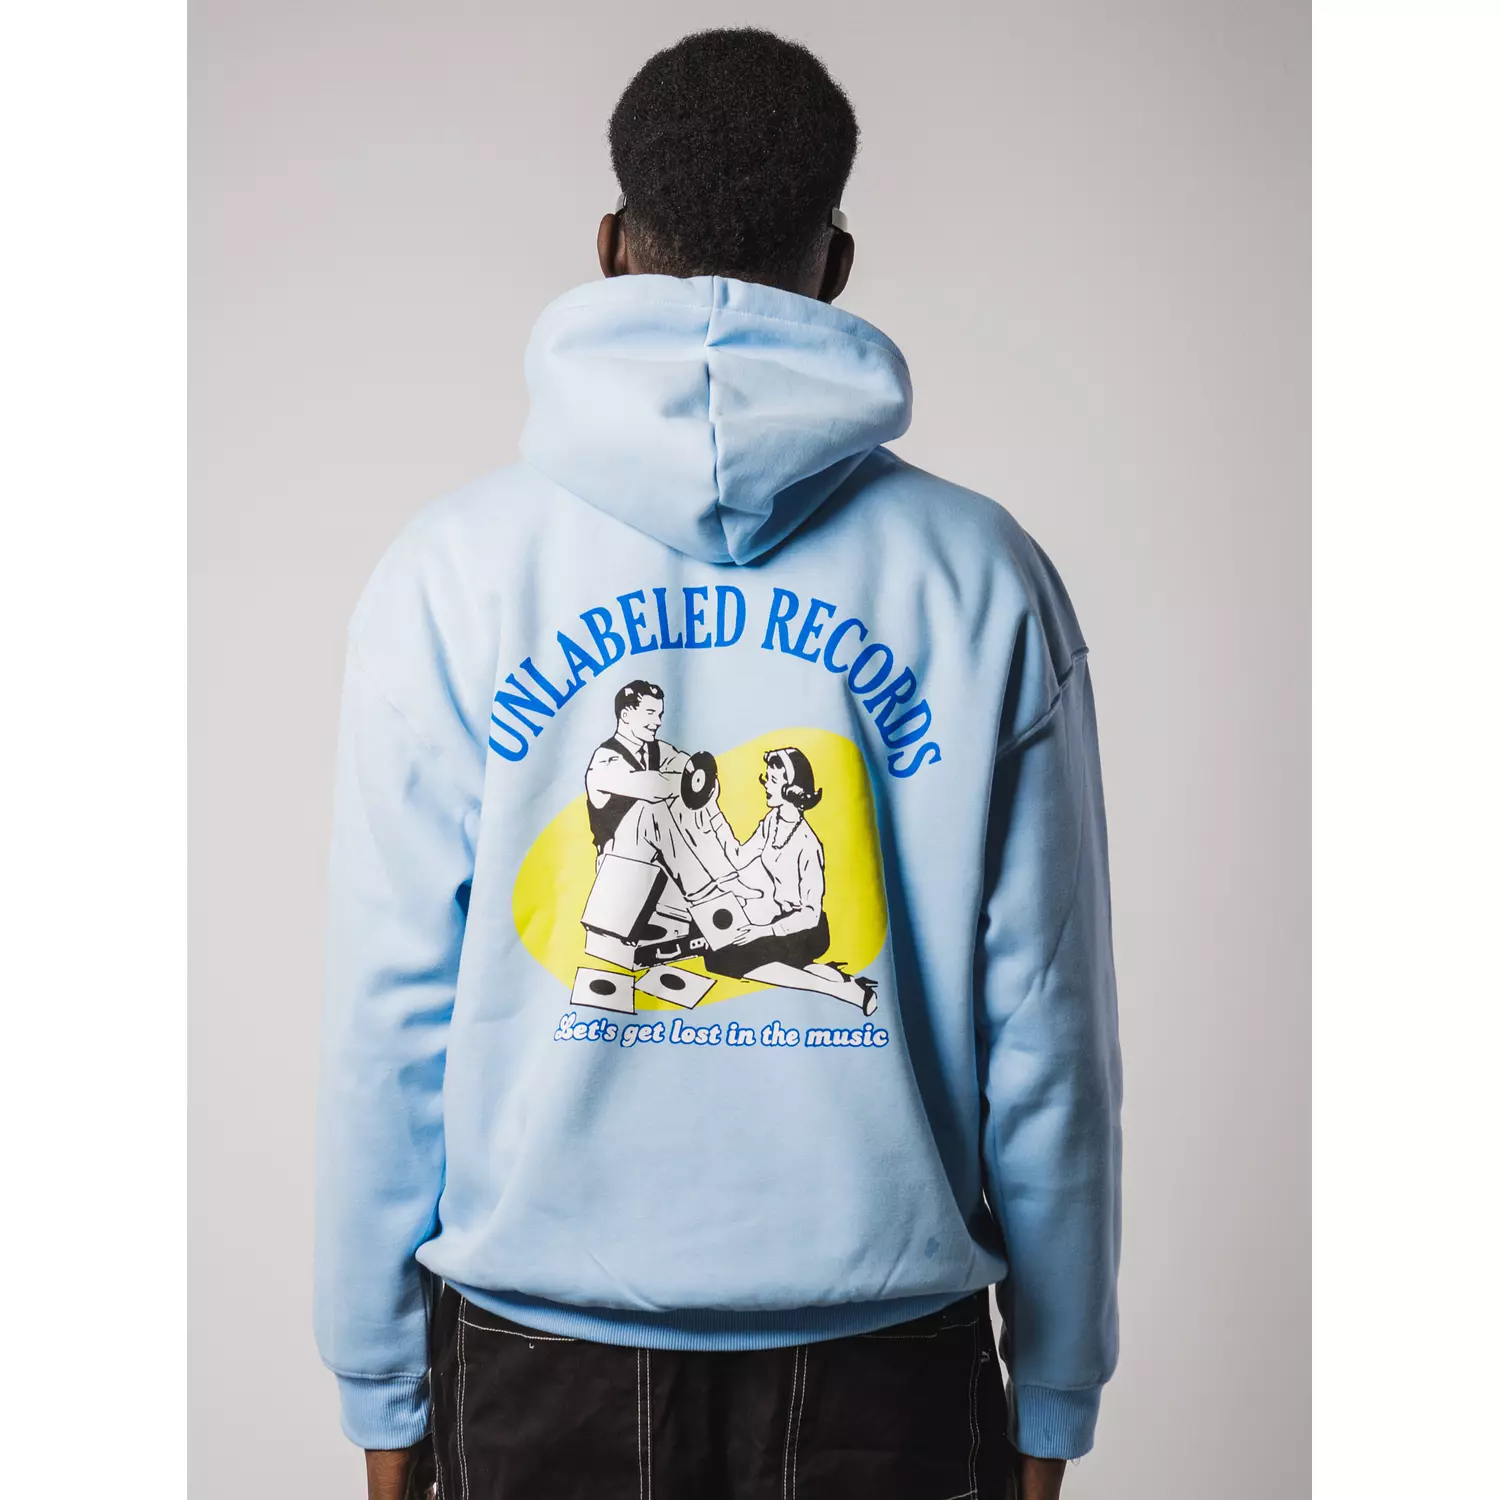 UNLABELED RECORDS HOODIE  hover image